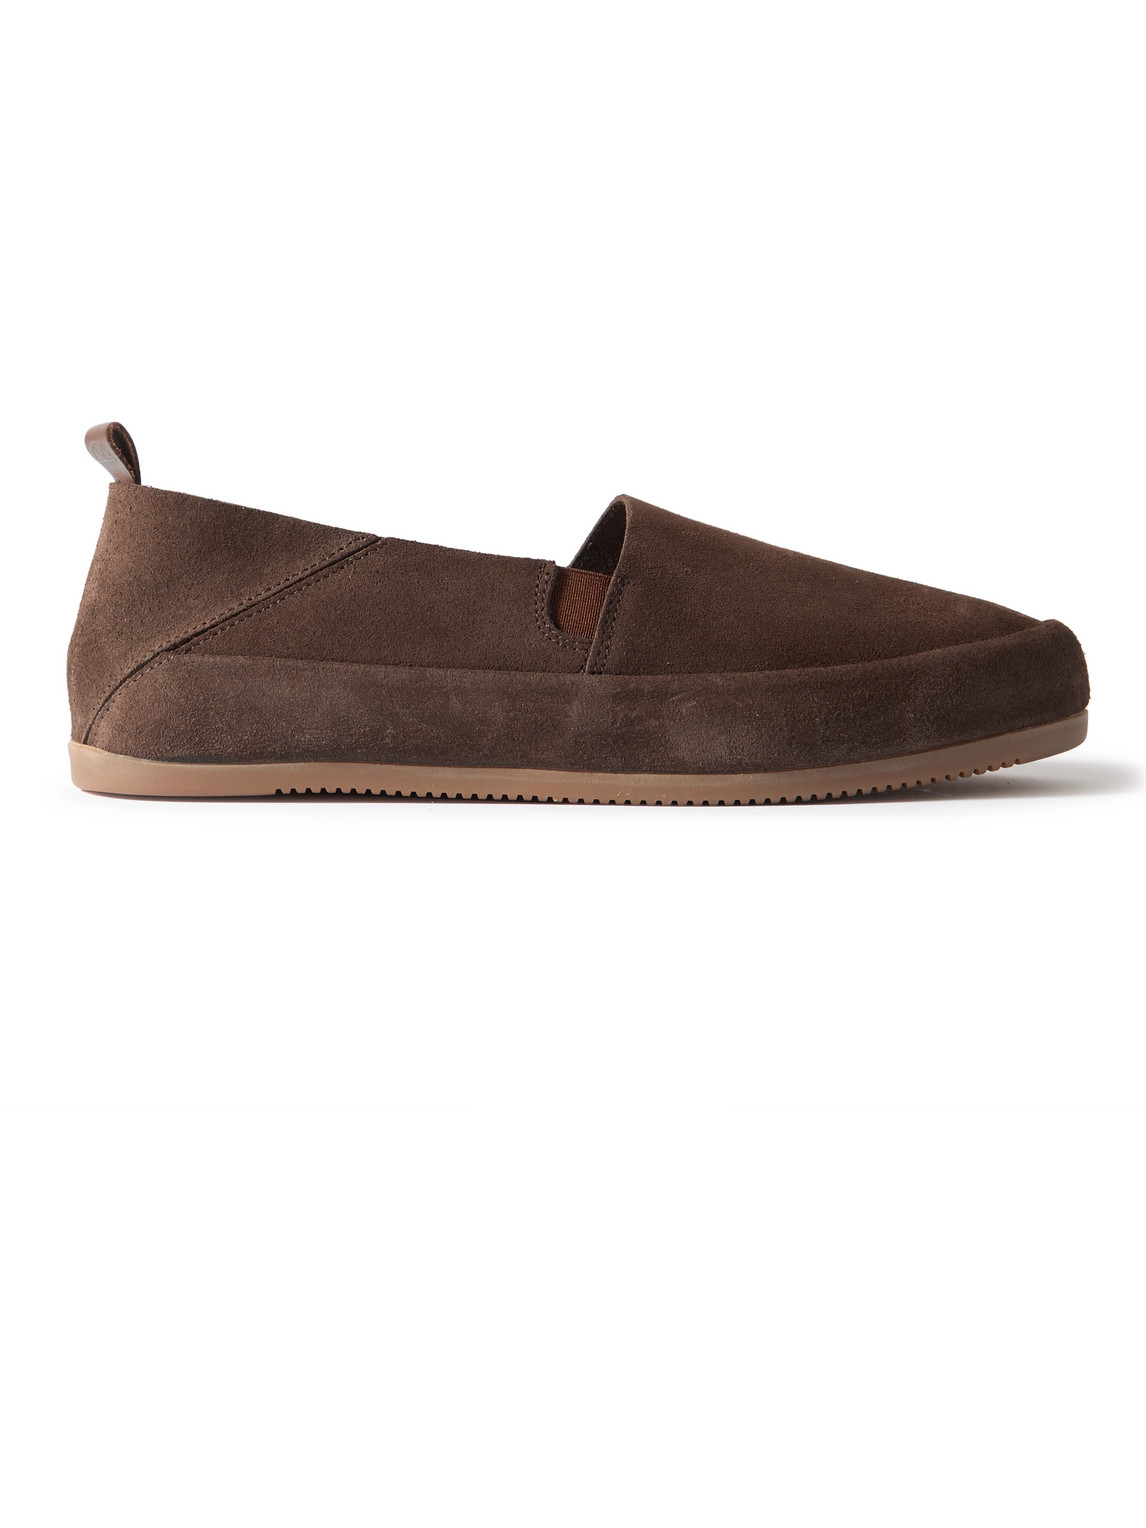 Travel Collapsible-Heel Suede Loafers